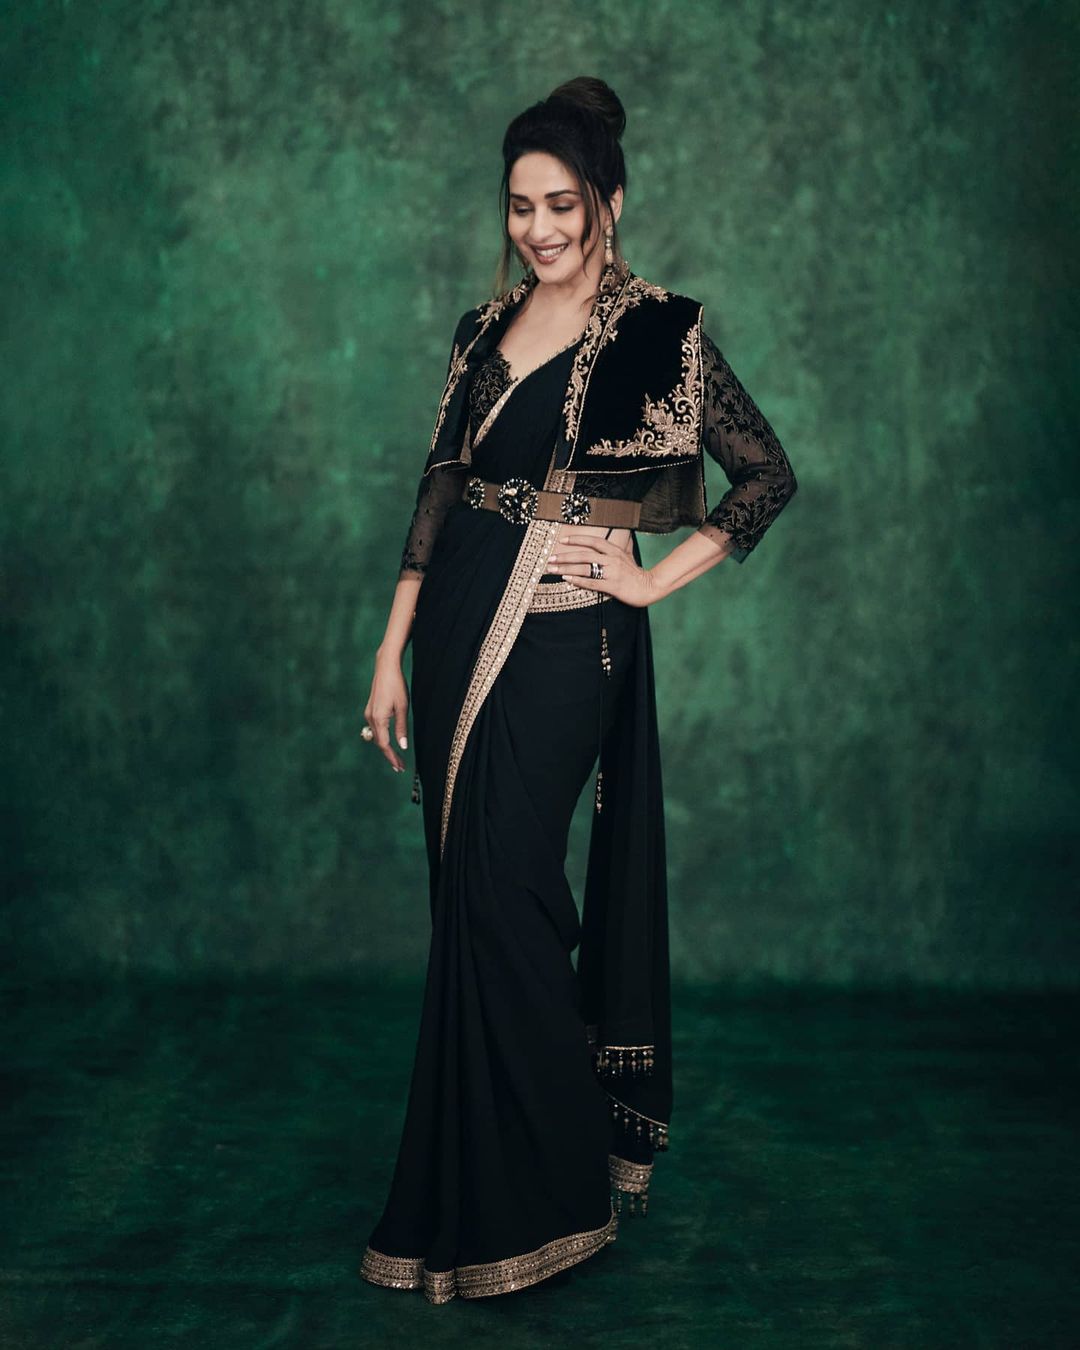 Madhuri Dixit Nene works her charm in the belted saree with a short jacket